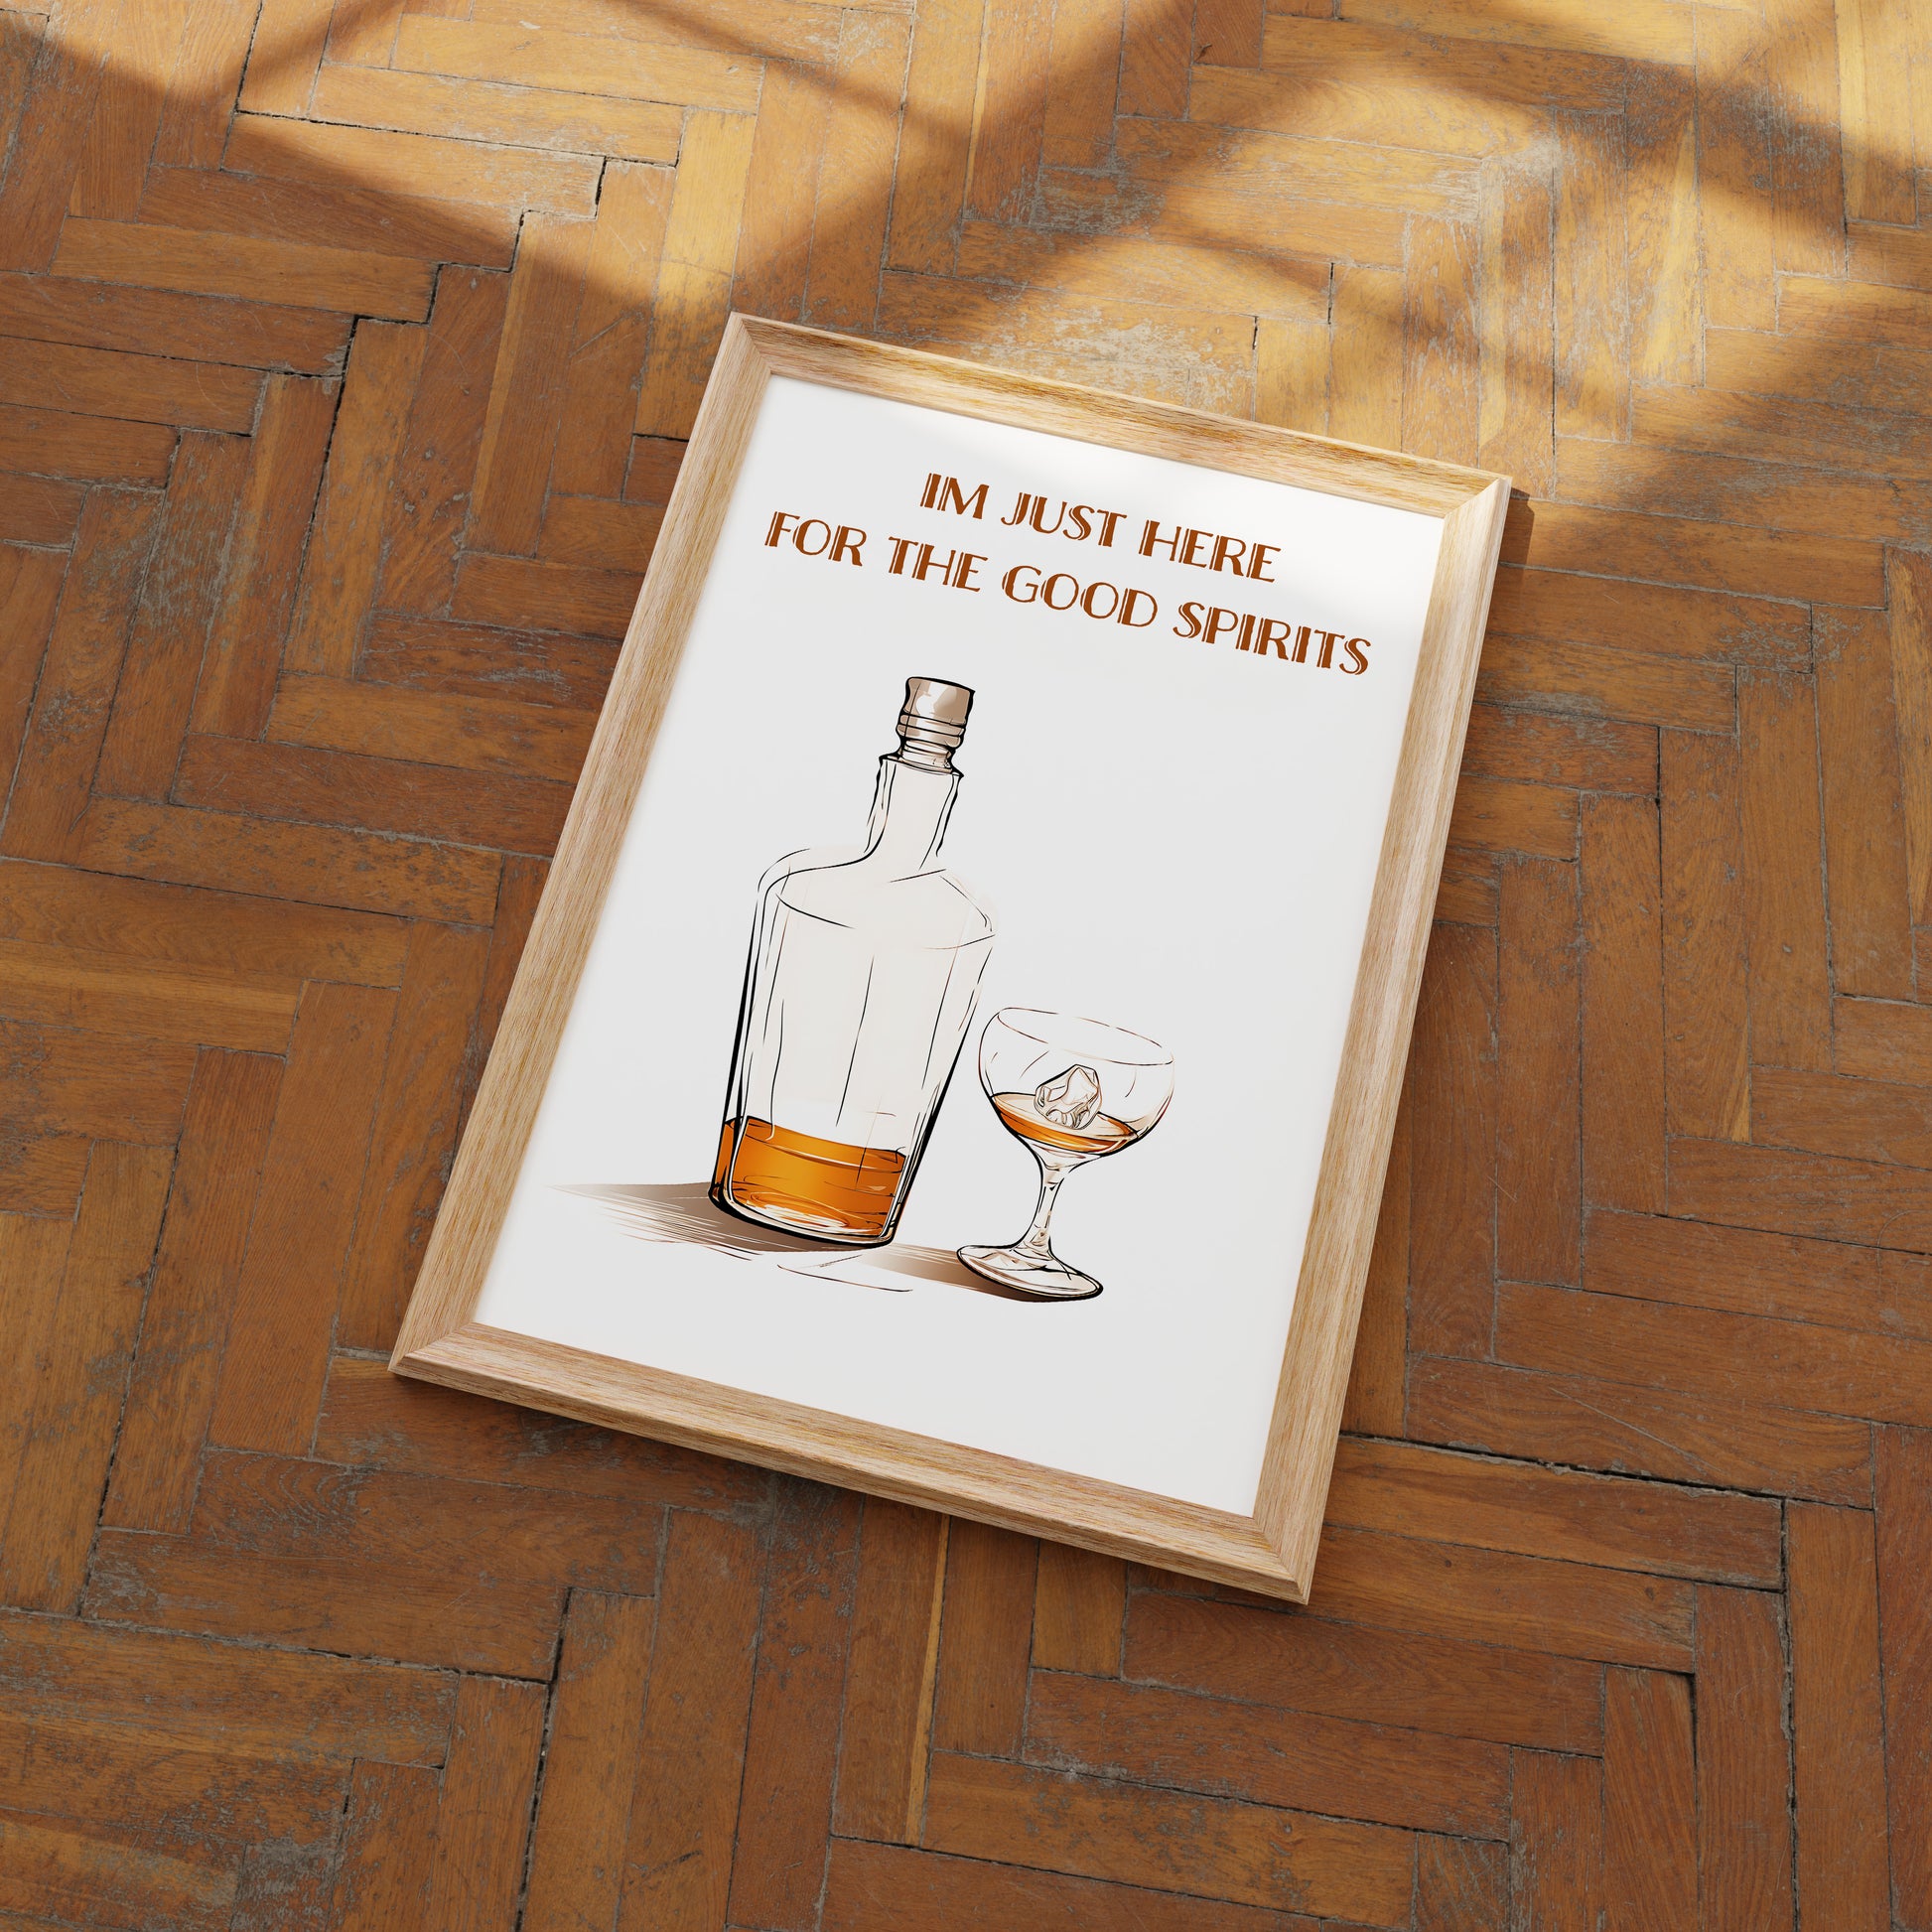 A framed poster with the phrase "I'm just here for the good spirits" above an illustration of a whiskey bottle and glass.